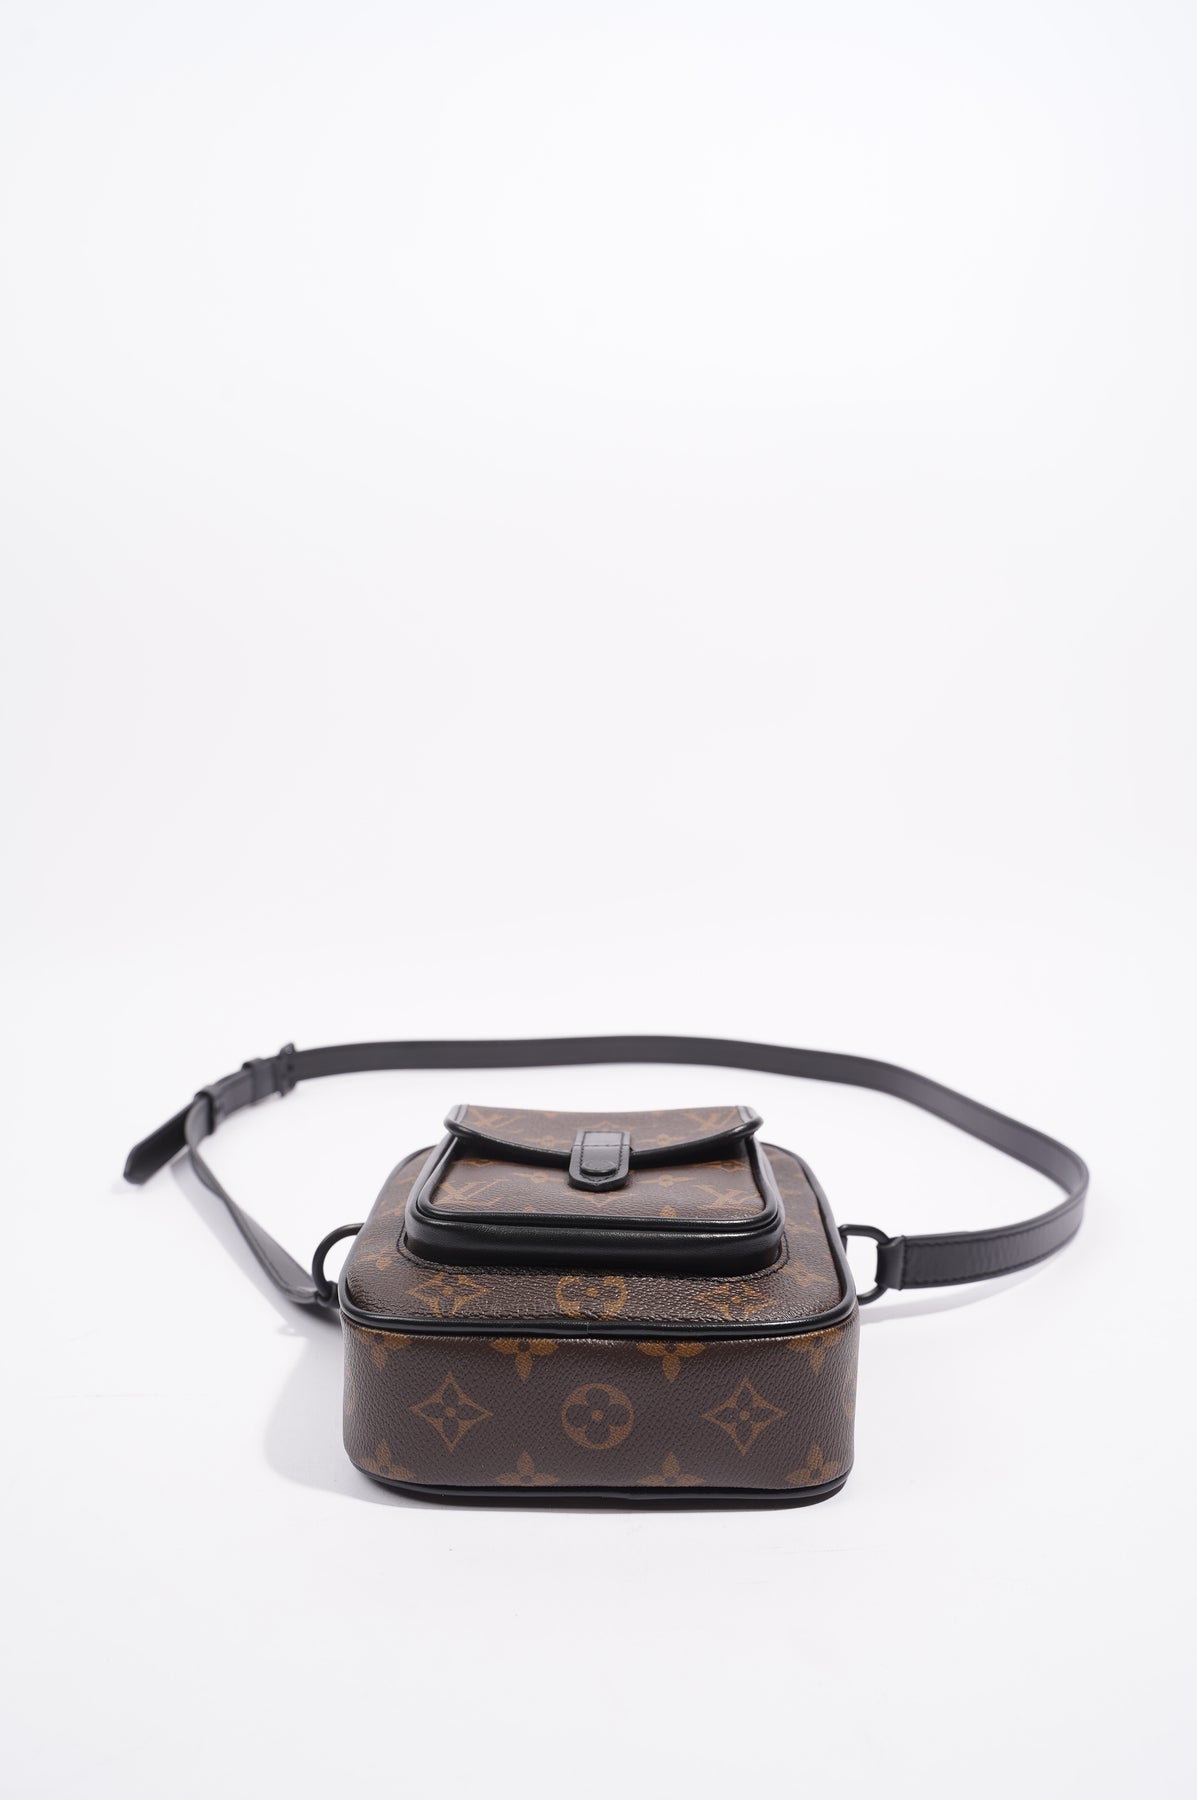 IMMIE brandname - New LV Christopher wearable อปก.